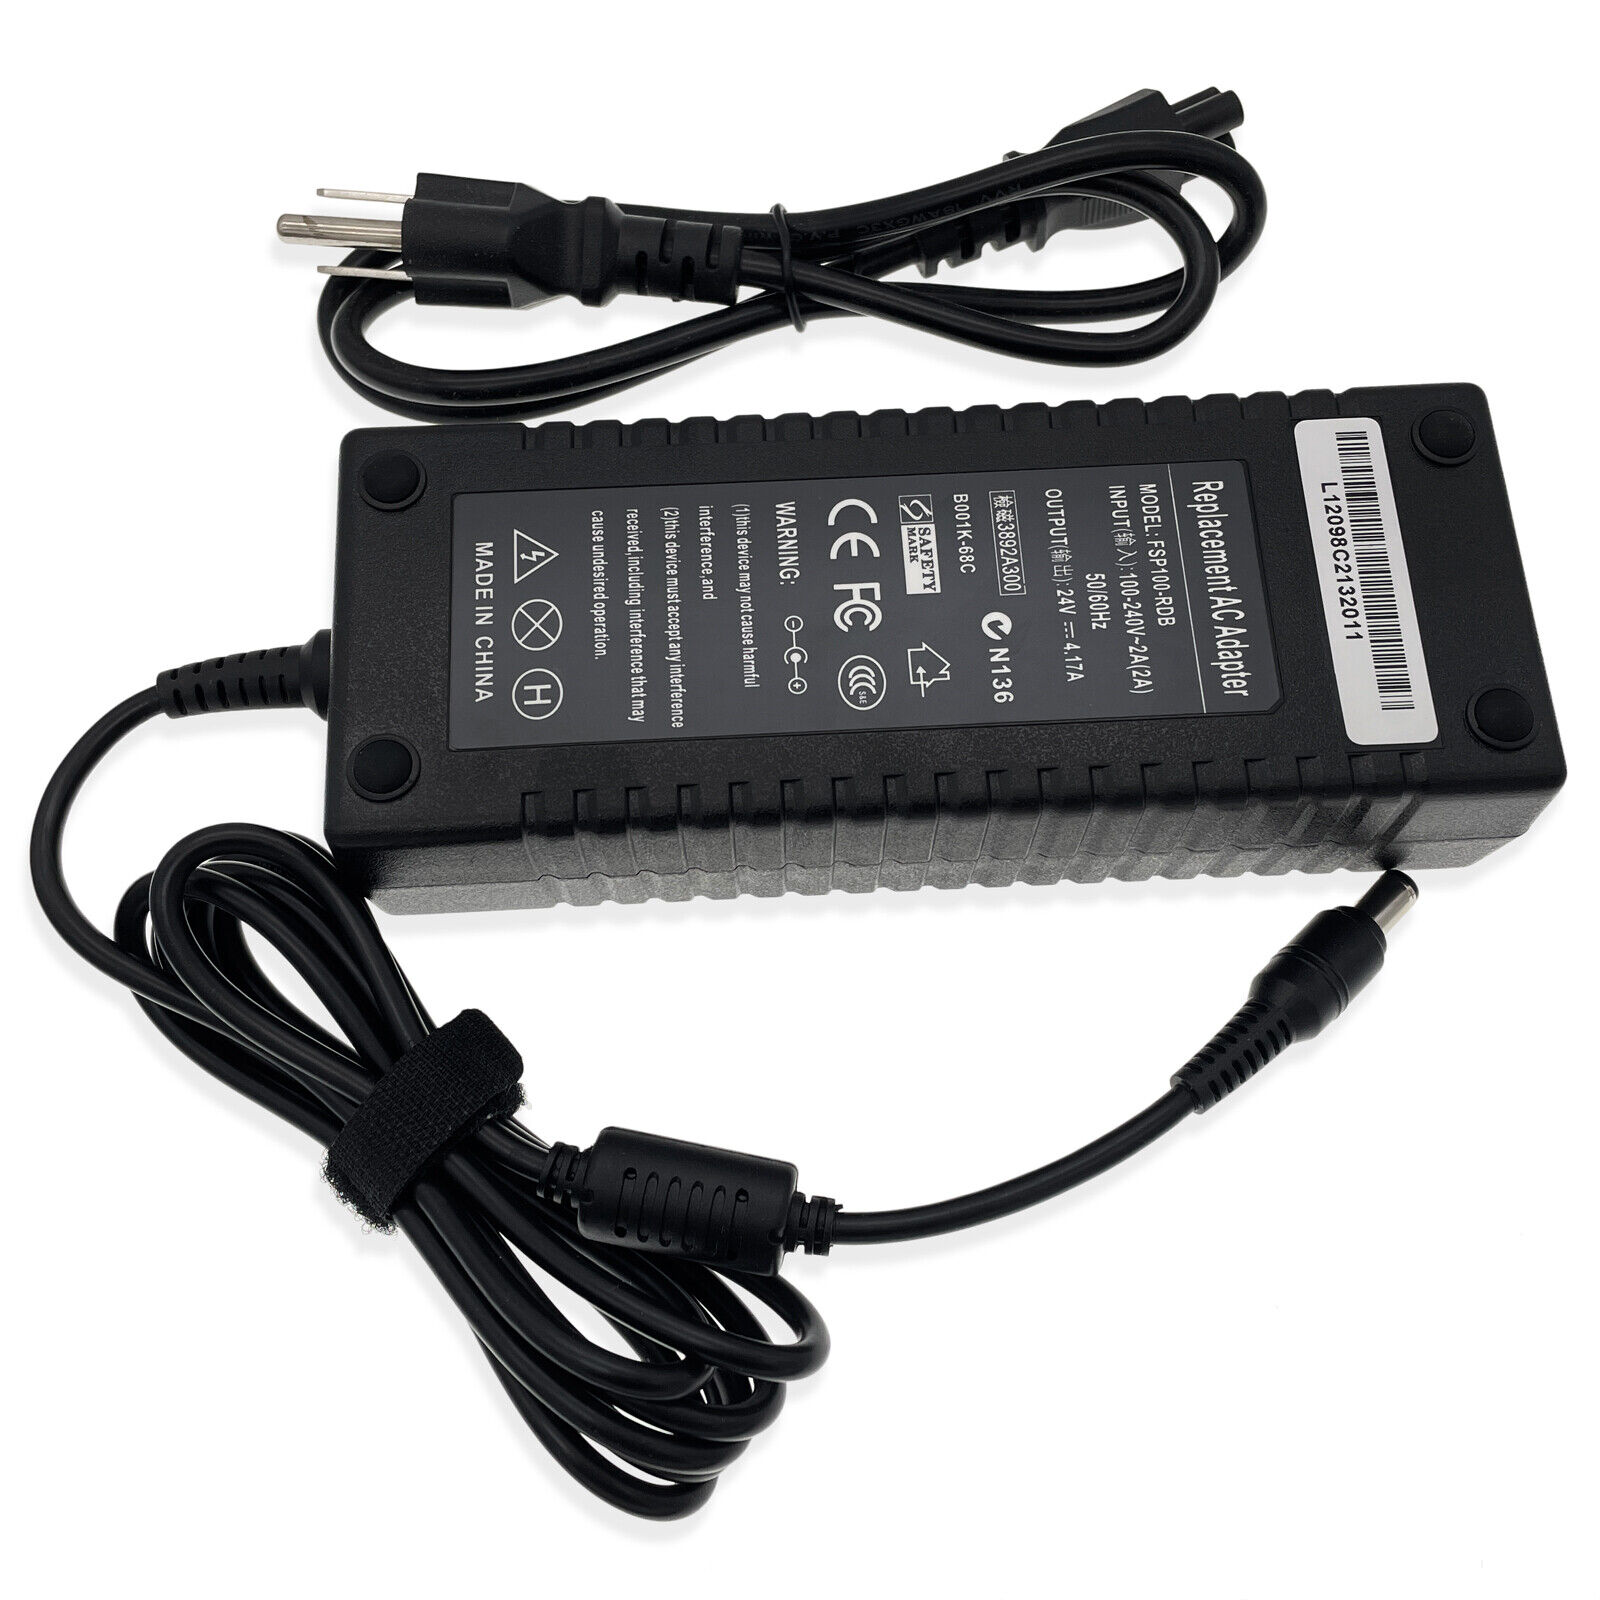 24V 4.17A AC Adapter Charger Power For Zebra FSP100-RDB P/N 808101-001 Printer Brand Unbranded/Generic Compatible Bran